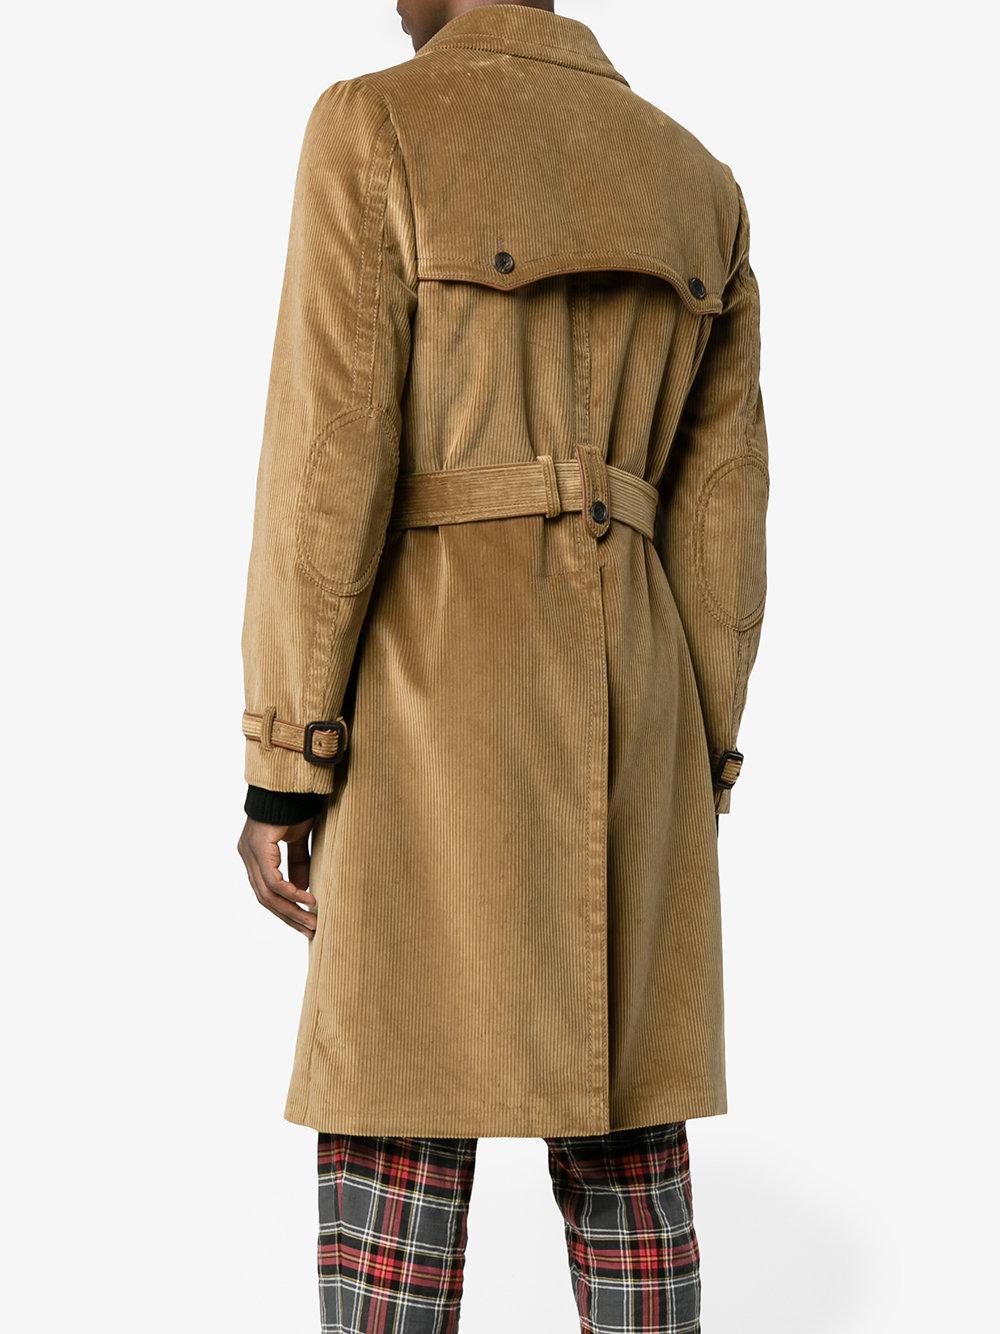 Prada Corduroy Trench Coat With Leather Detail in Brown for Men - Lyst